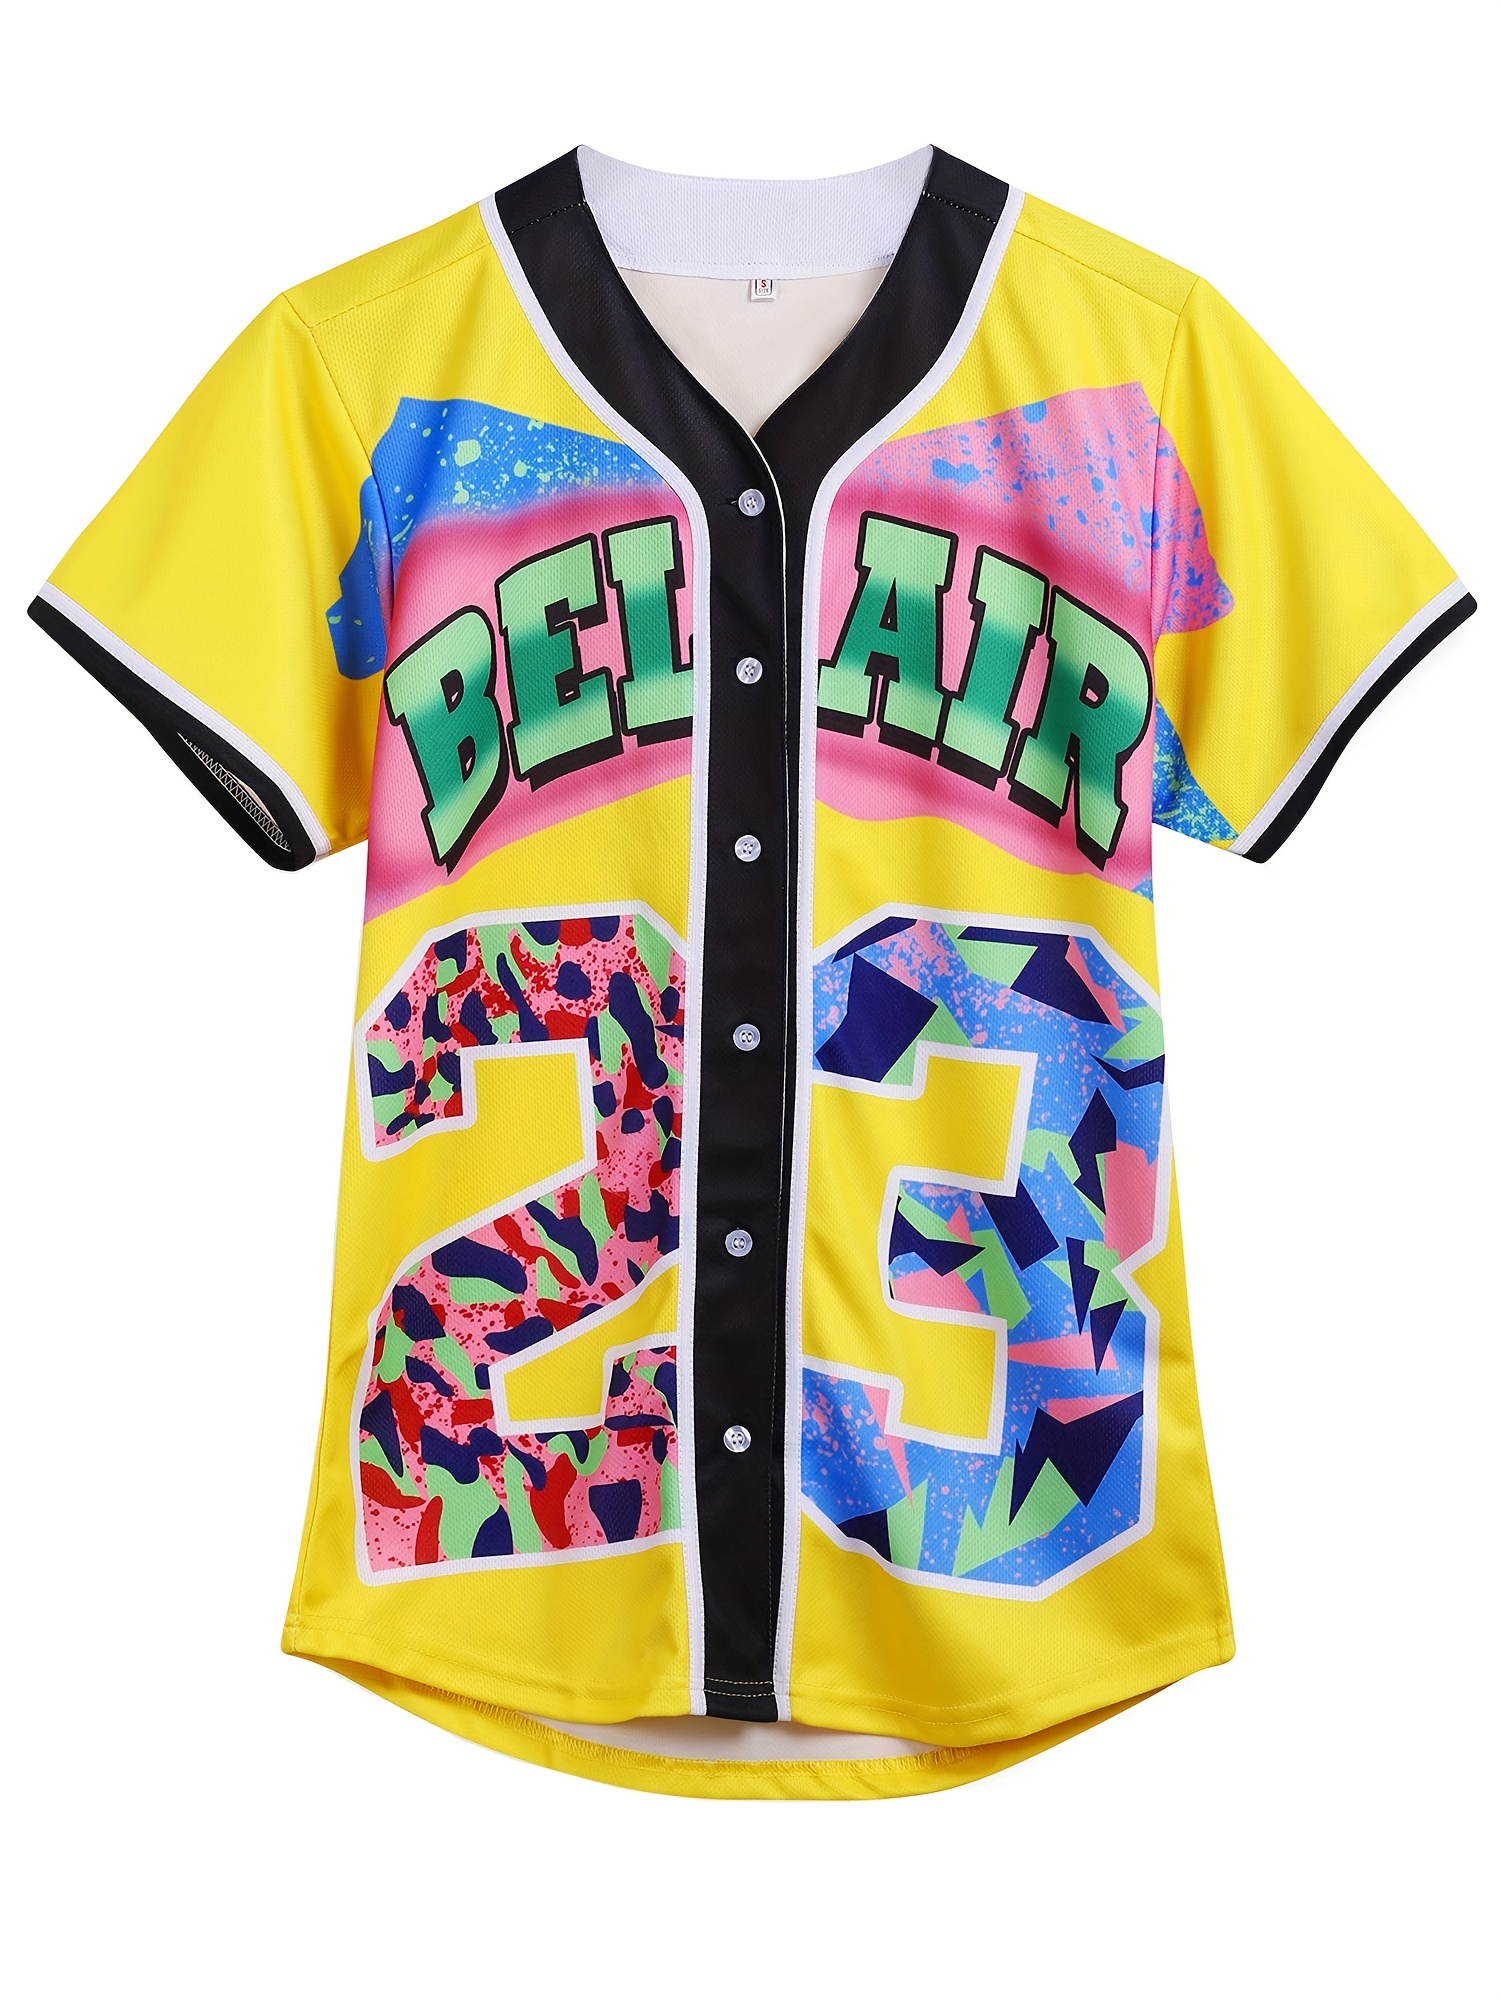 Unisex Vintage 90s Theme Party Hip Hop Baseball Jersey Hip Hop Clothing for  Women Short Sleeve T-Shirts